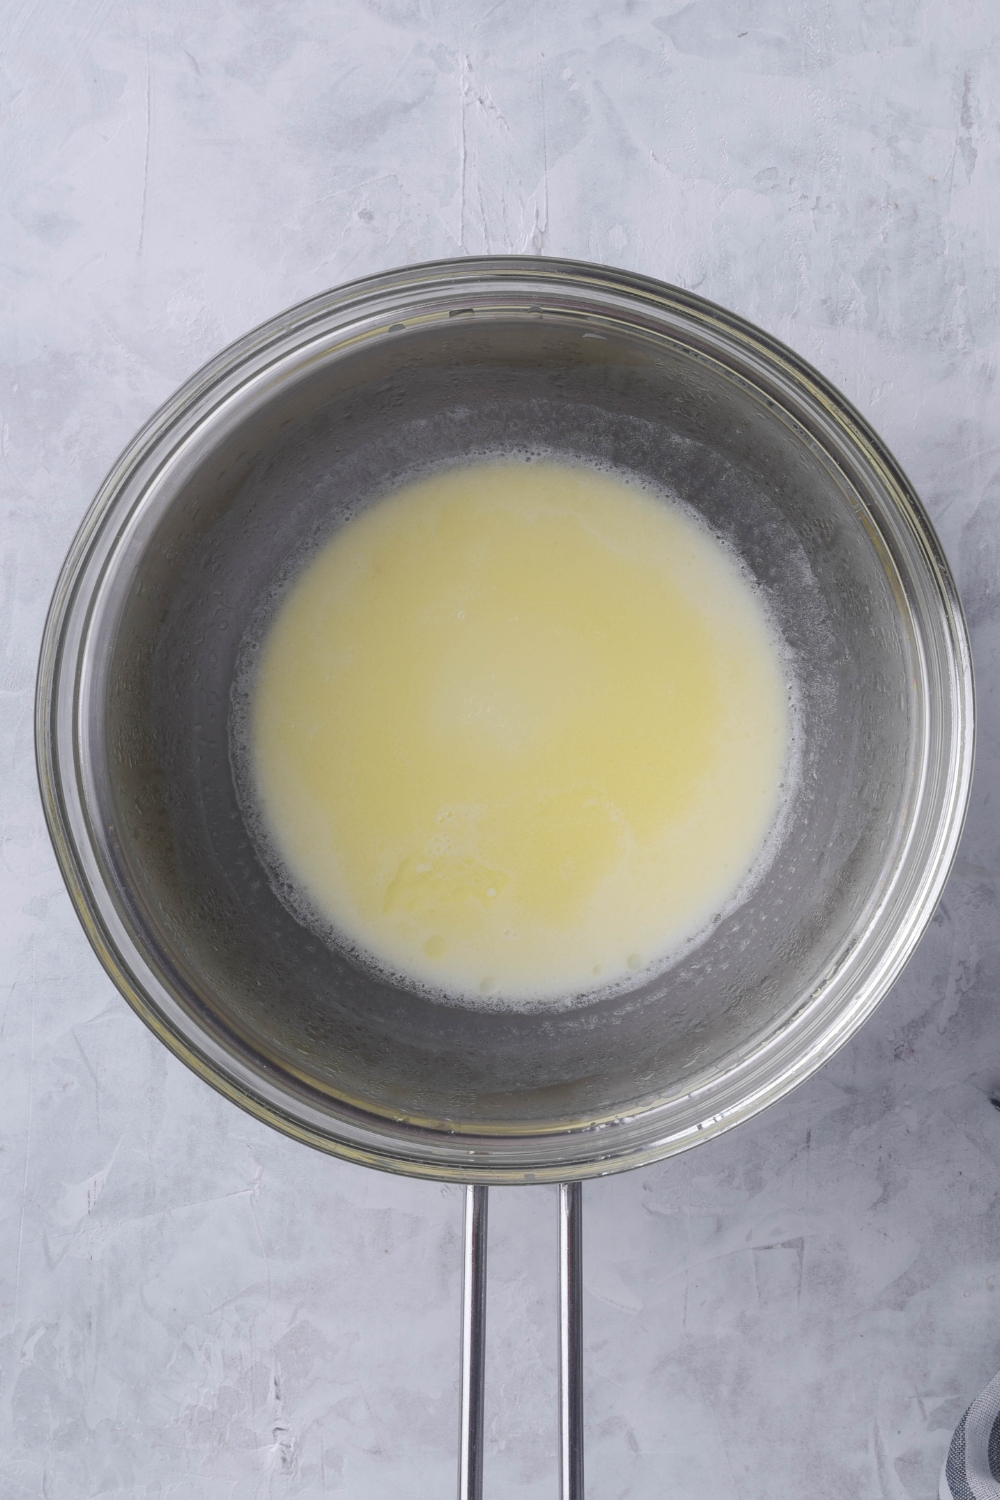 A double boiler with melted butter and milk.